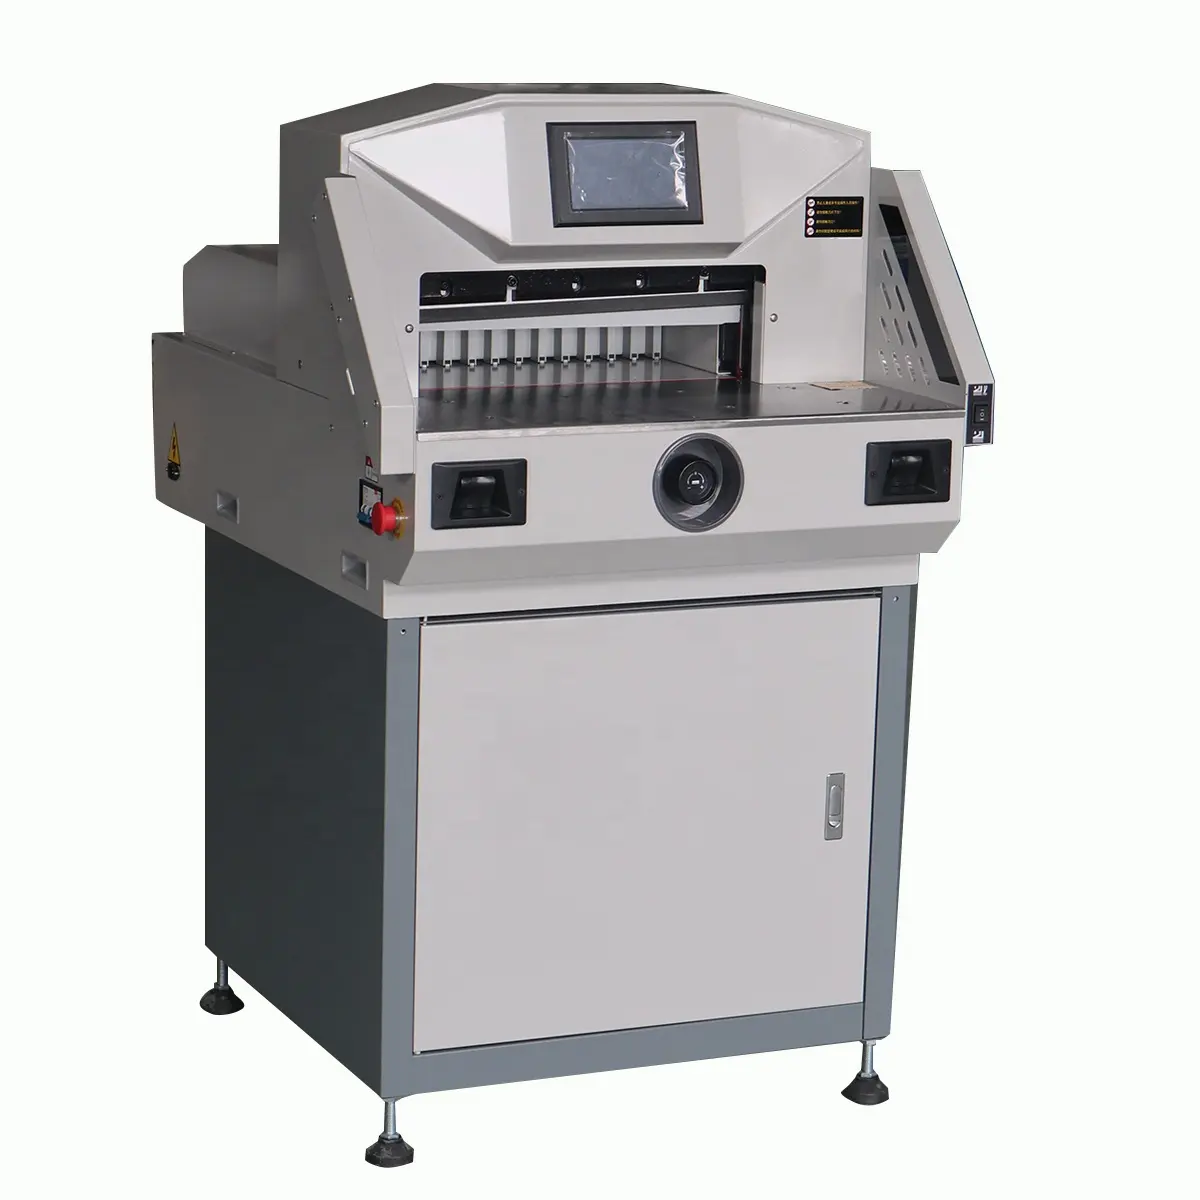 Qike QK-4908B heavy duty electric program-controlled wrapping 490mm paper guillotine cutter cutting machine